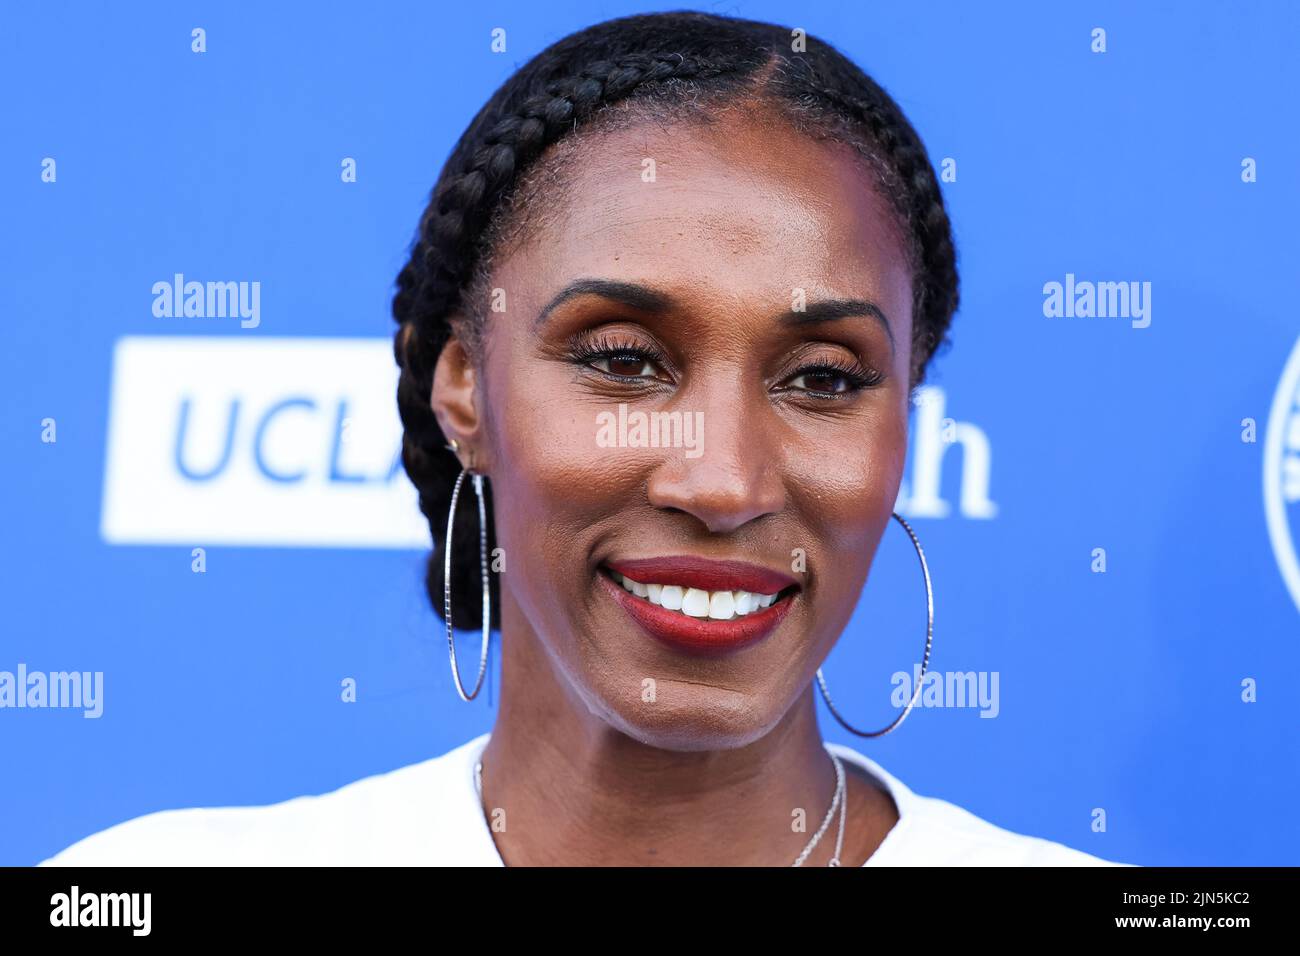 Los Angeles, United States. 08th Aug, 2022. ELYSIAN PARK, LOS ANGELES, CALIFORNIA, USA - AUGUST 08: American former professional basketball player Lisa Leslie arrives at Kershaw's Challenge Ping Pong 4 Purpose 2022 held at Dodger Stadium on August 8, 2022 in Elysian Park, Los Angeles, California, United States. (Photo by Xavier Collin/Image Press Agency) Credit: Image Press Agency/Alamy Live News Stock Photo